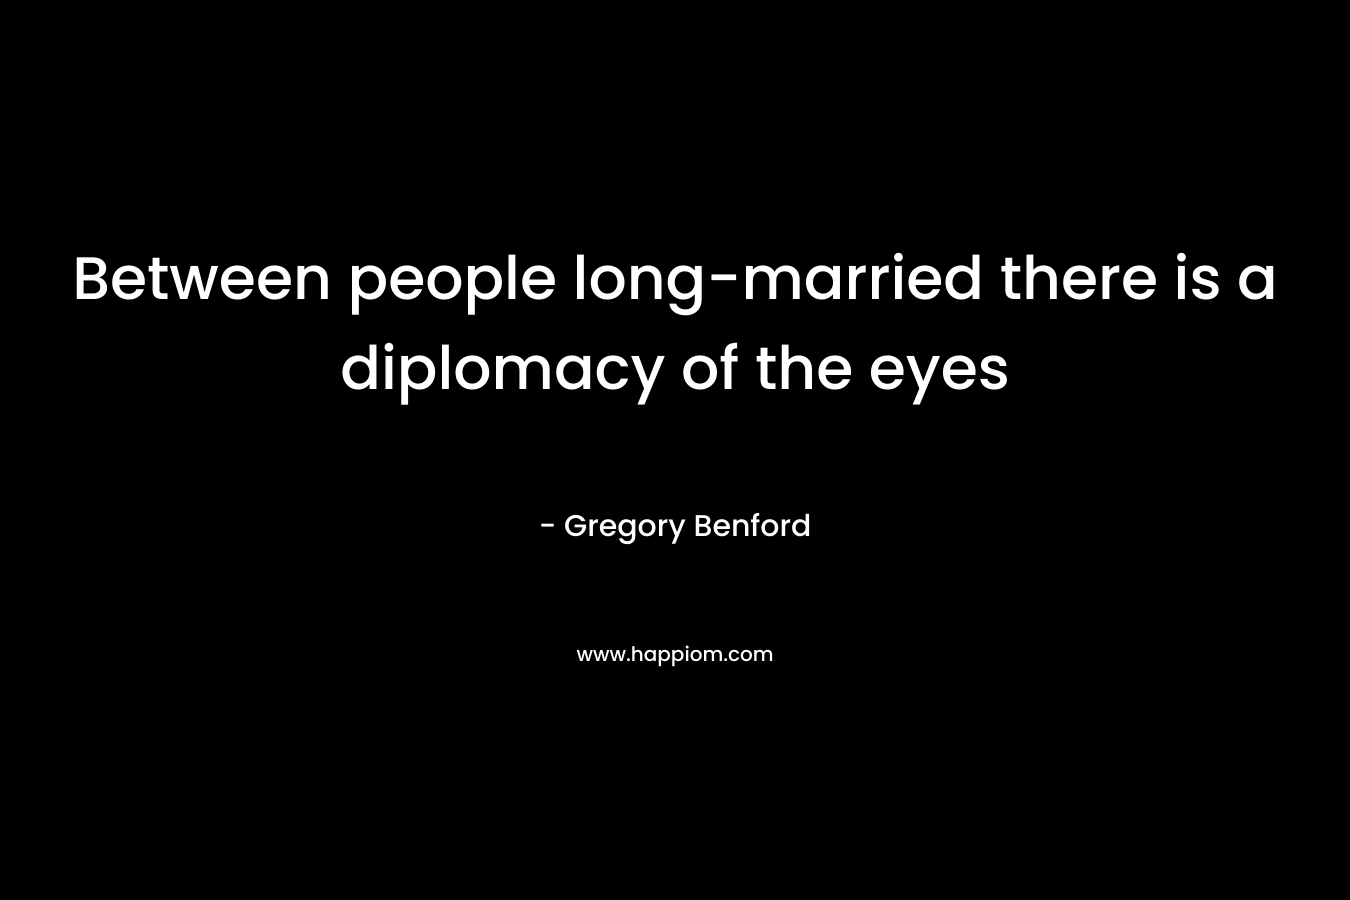 Between people long-married there is a diplomacy of the eyes – Gregory Benford